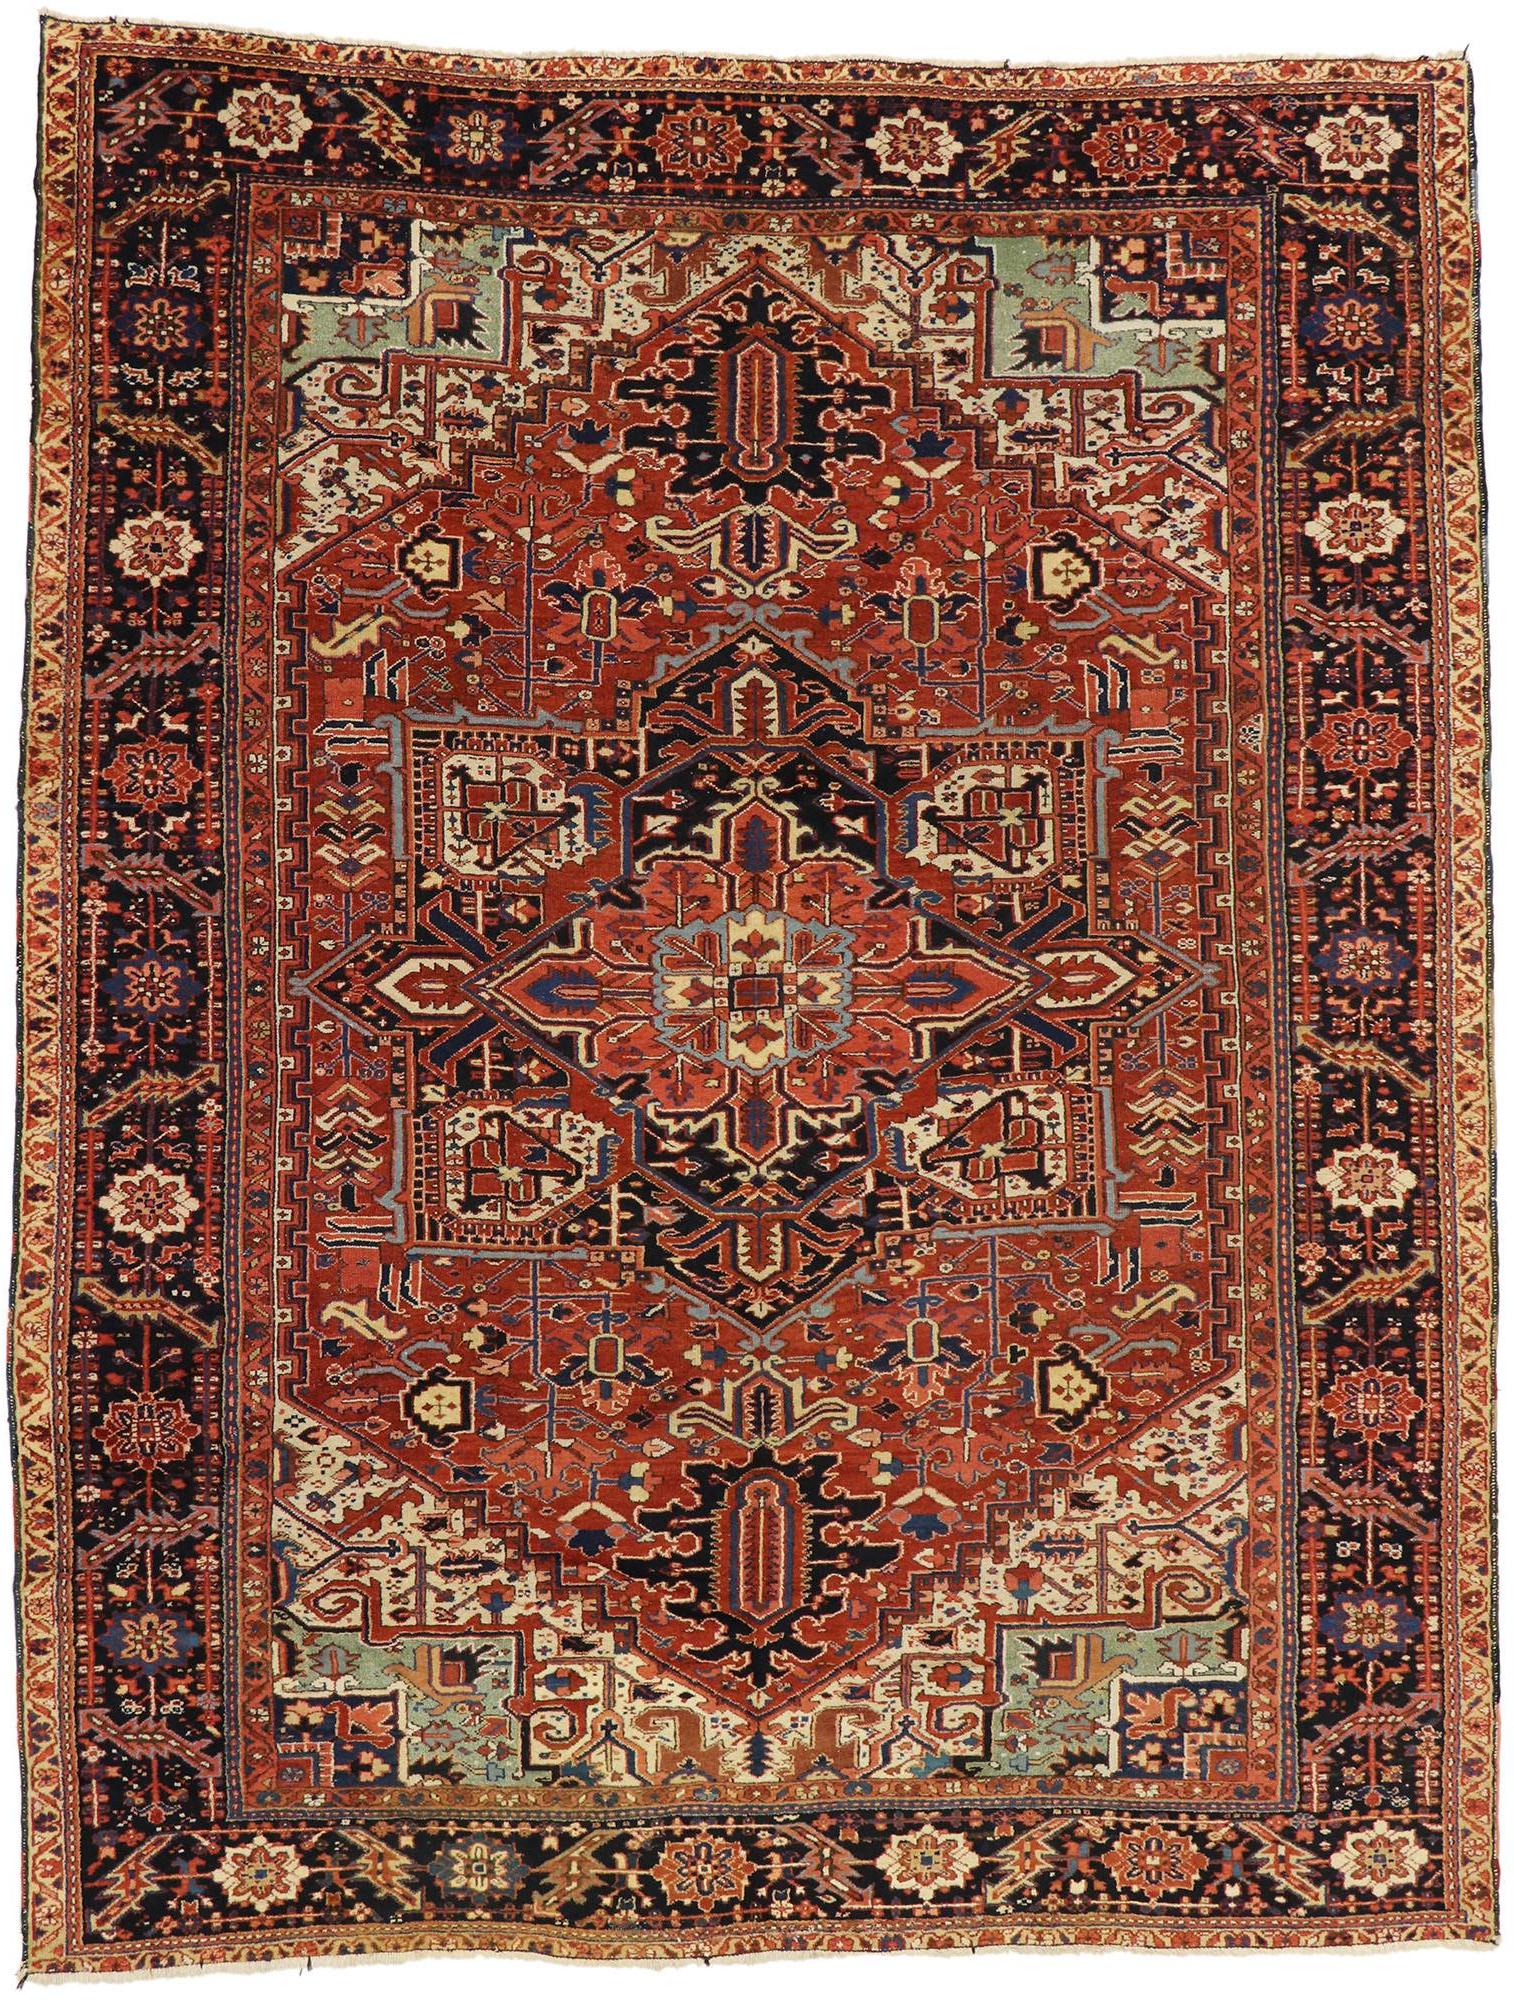 70227 Antique Persian Heriz Rug with Modern American Craftsman Style. Overflowing in a sophisticated chic color palette and representing a stylish union of Modern American Craftsman style, this antique Heriz Persian rug showcases classical elements